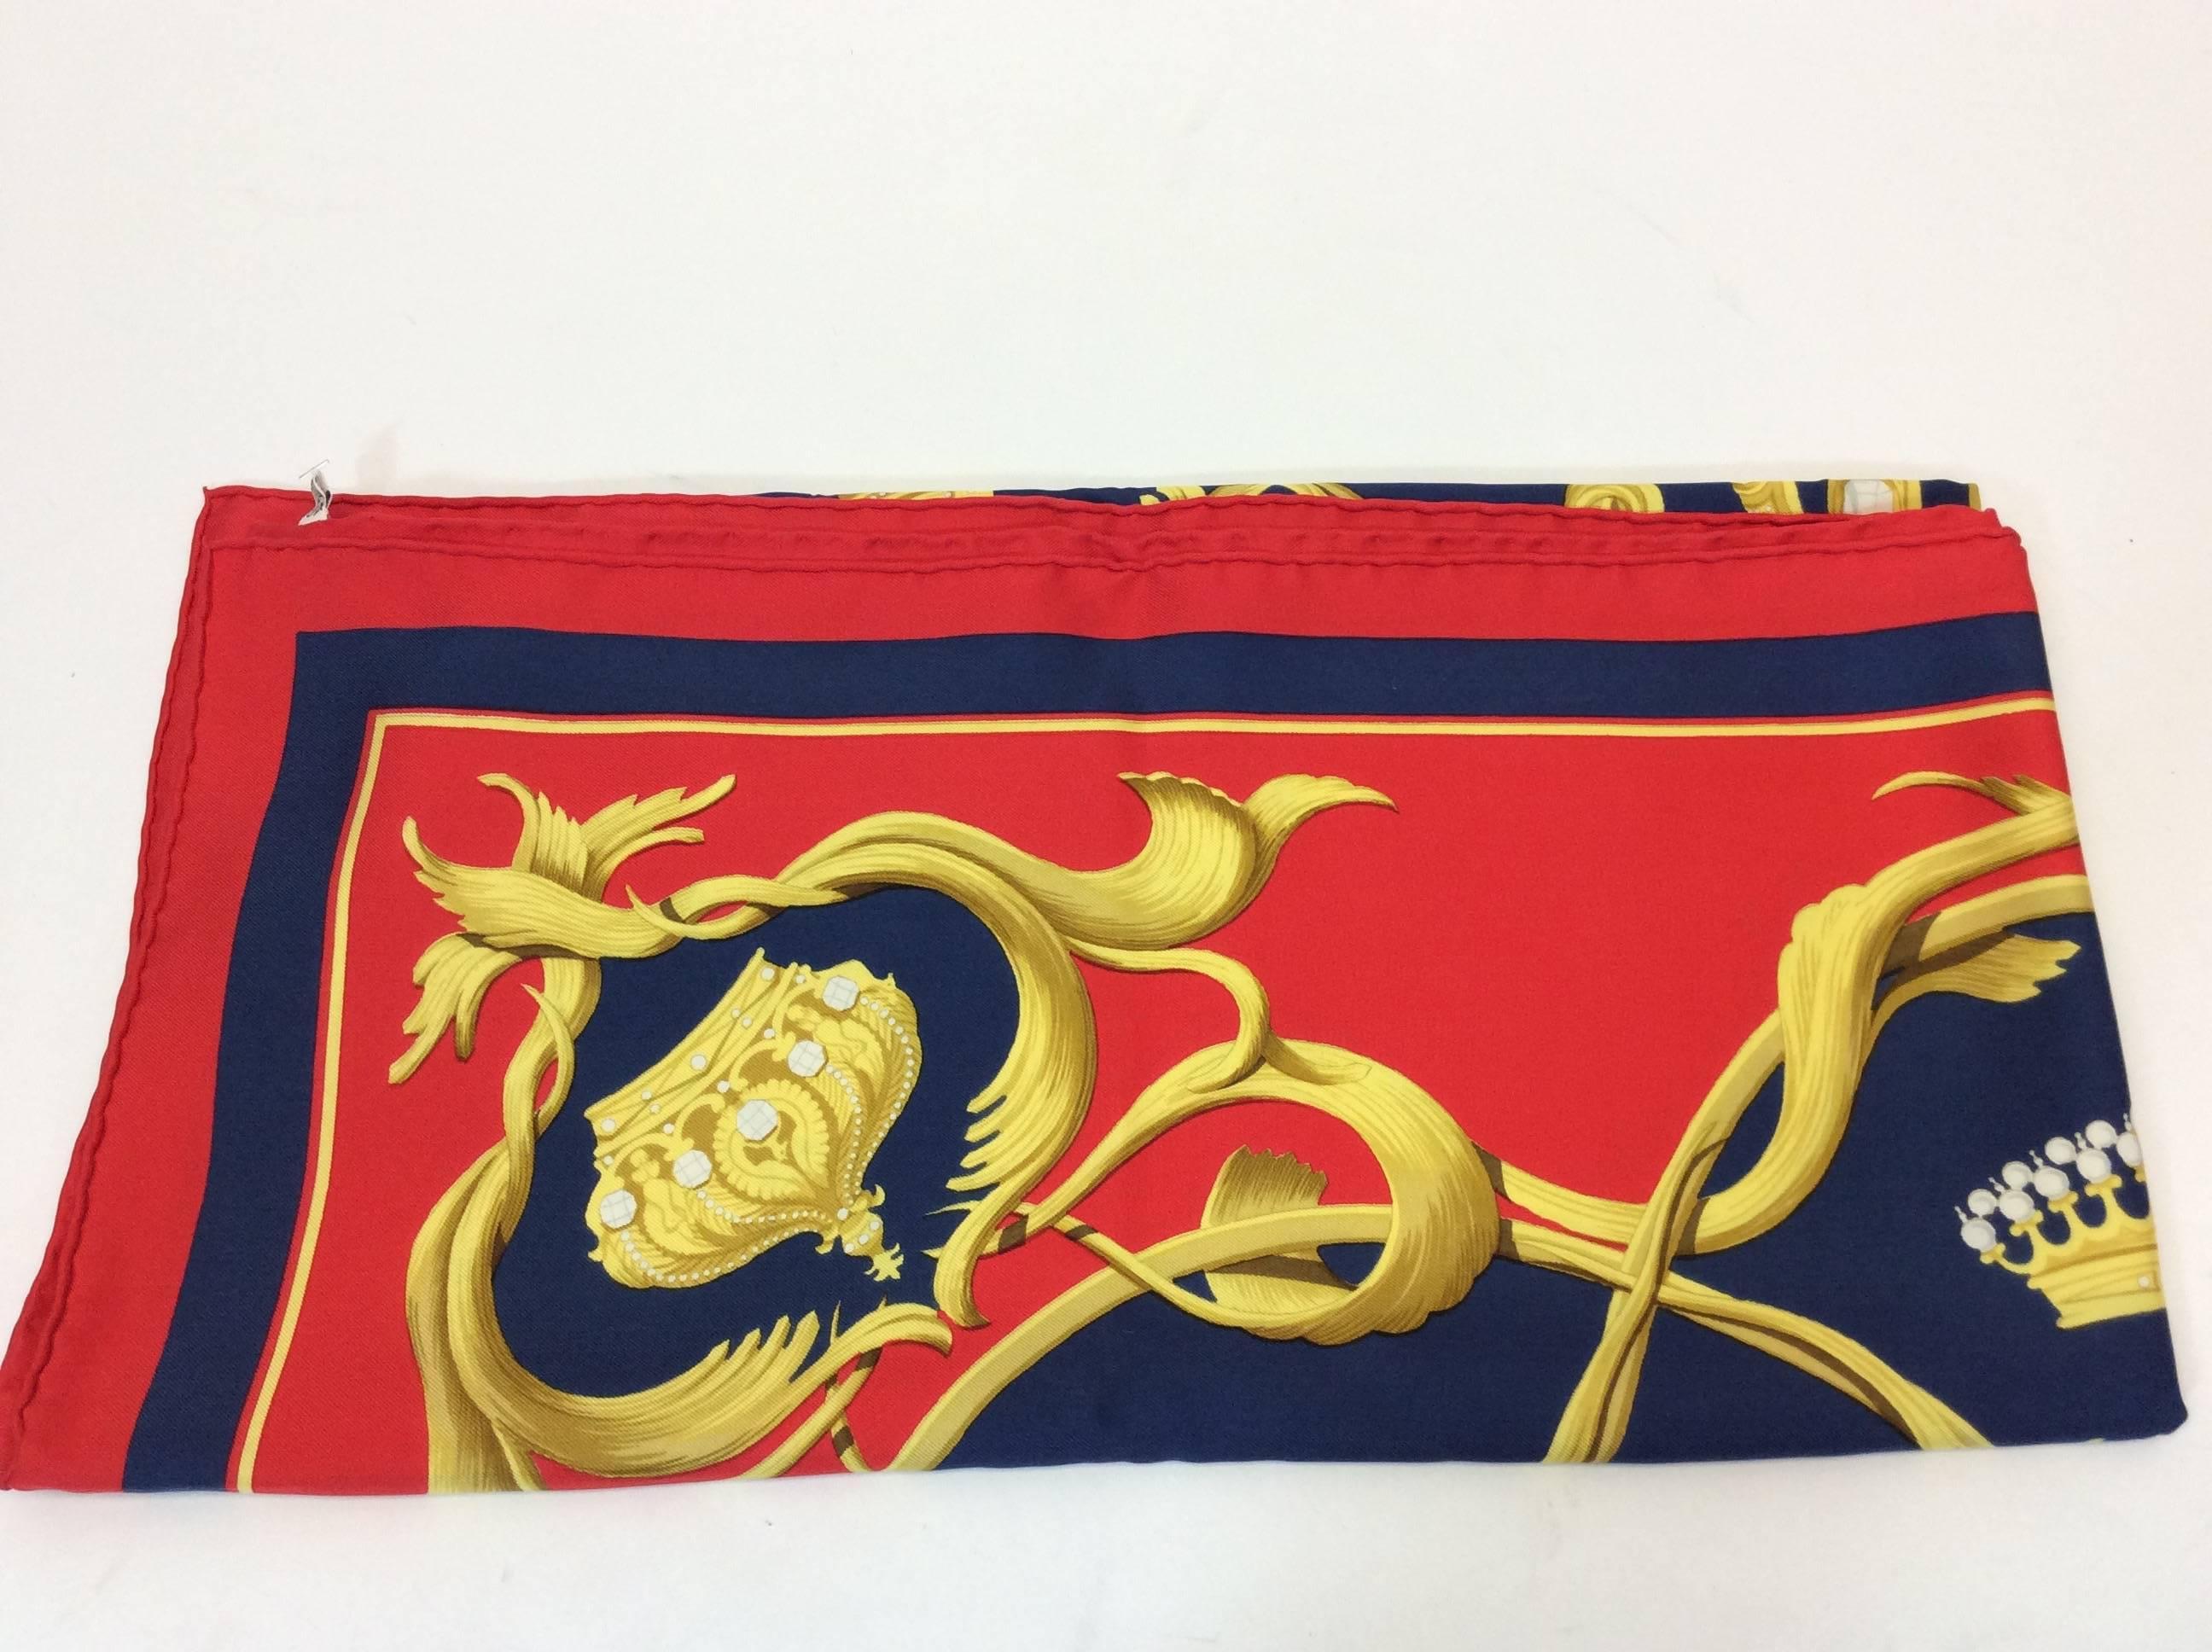 Authentic Hermes 100% silk scarf by Julia Abadie
First issued in 1969
The scarf features crowns or couronnes. 
100% Silk, Copyright symbol is on the scarf. 
34 1/2